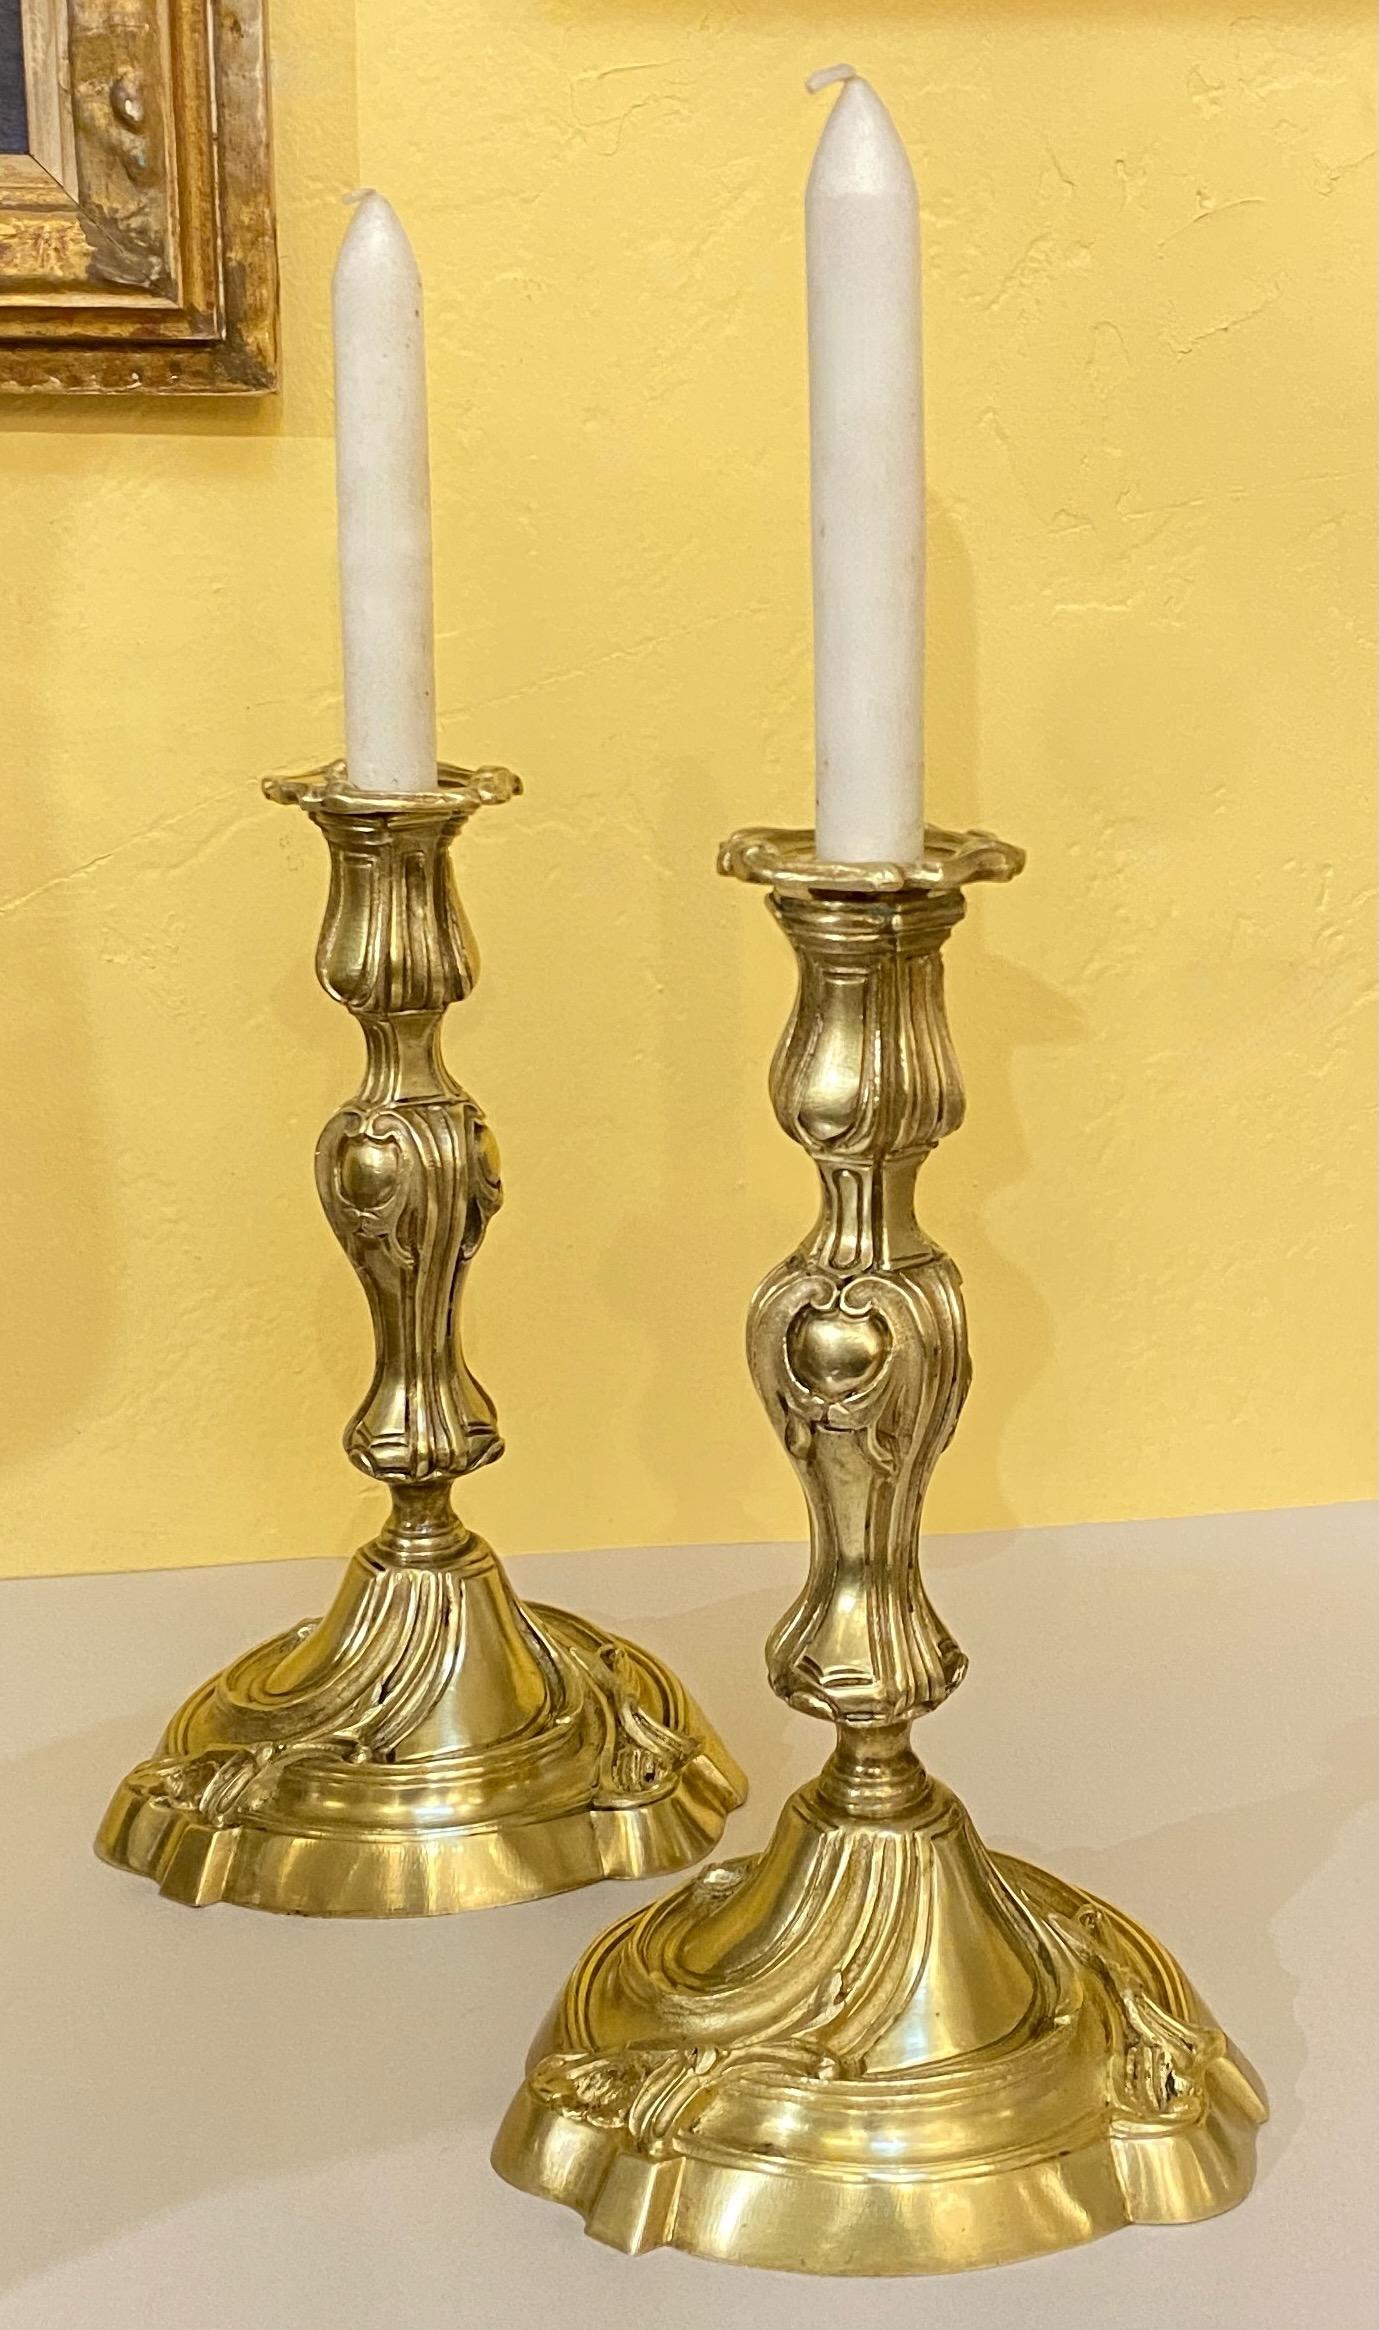 Pair French Baroque Style Brass Candlesticks Candle Lamps, Early 19th Century For Sale 1